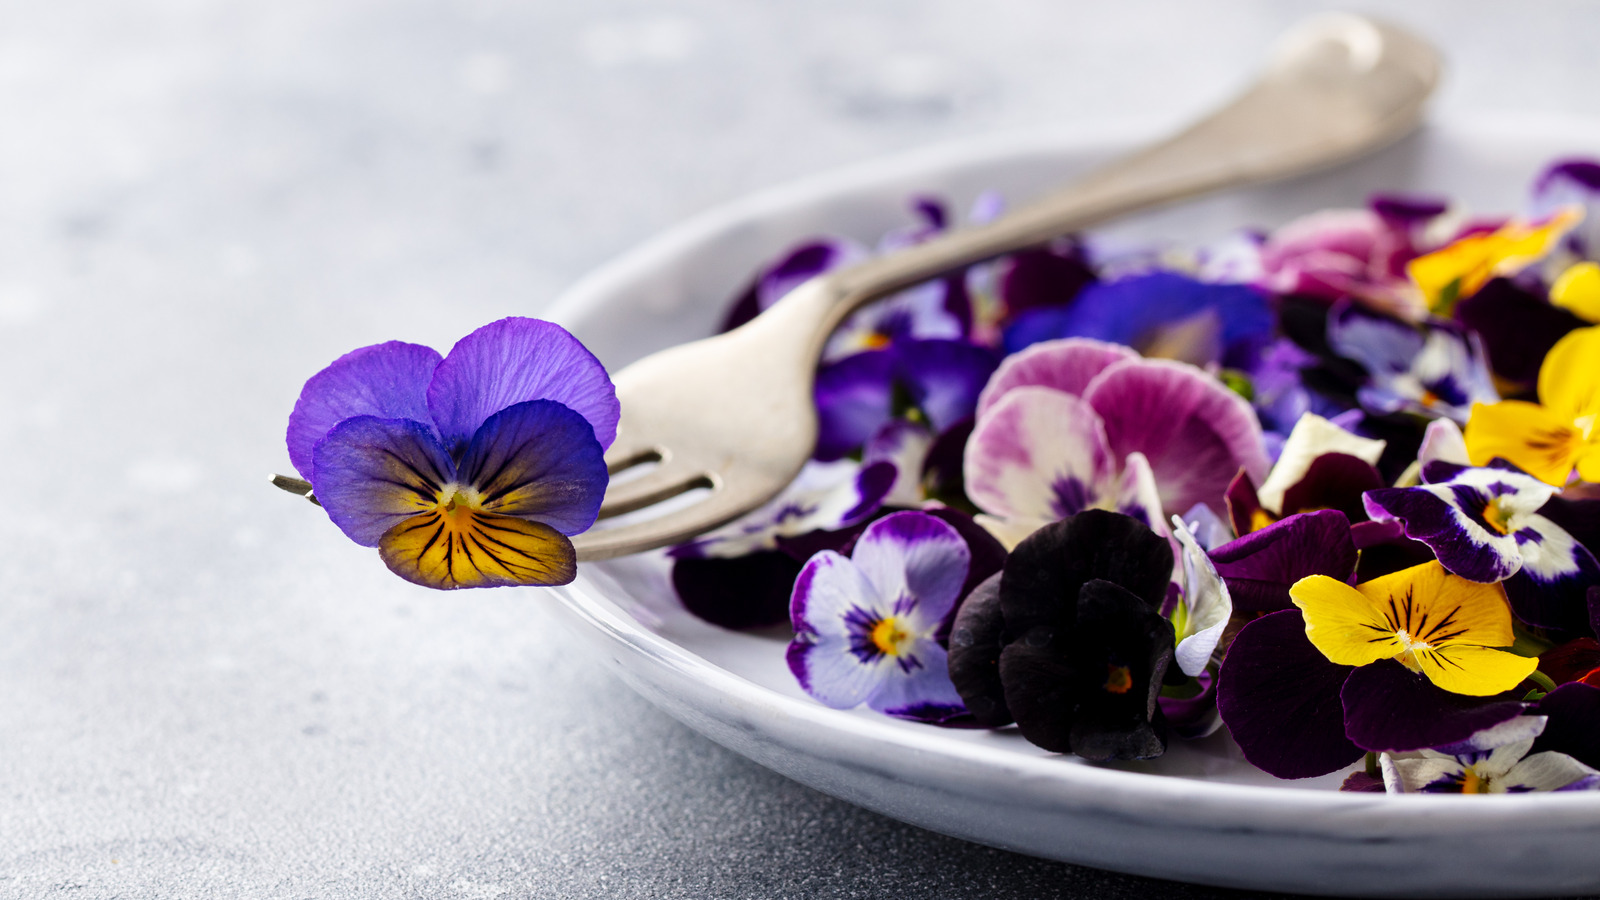 Petal to Plate: Cooking with Edible Flowers